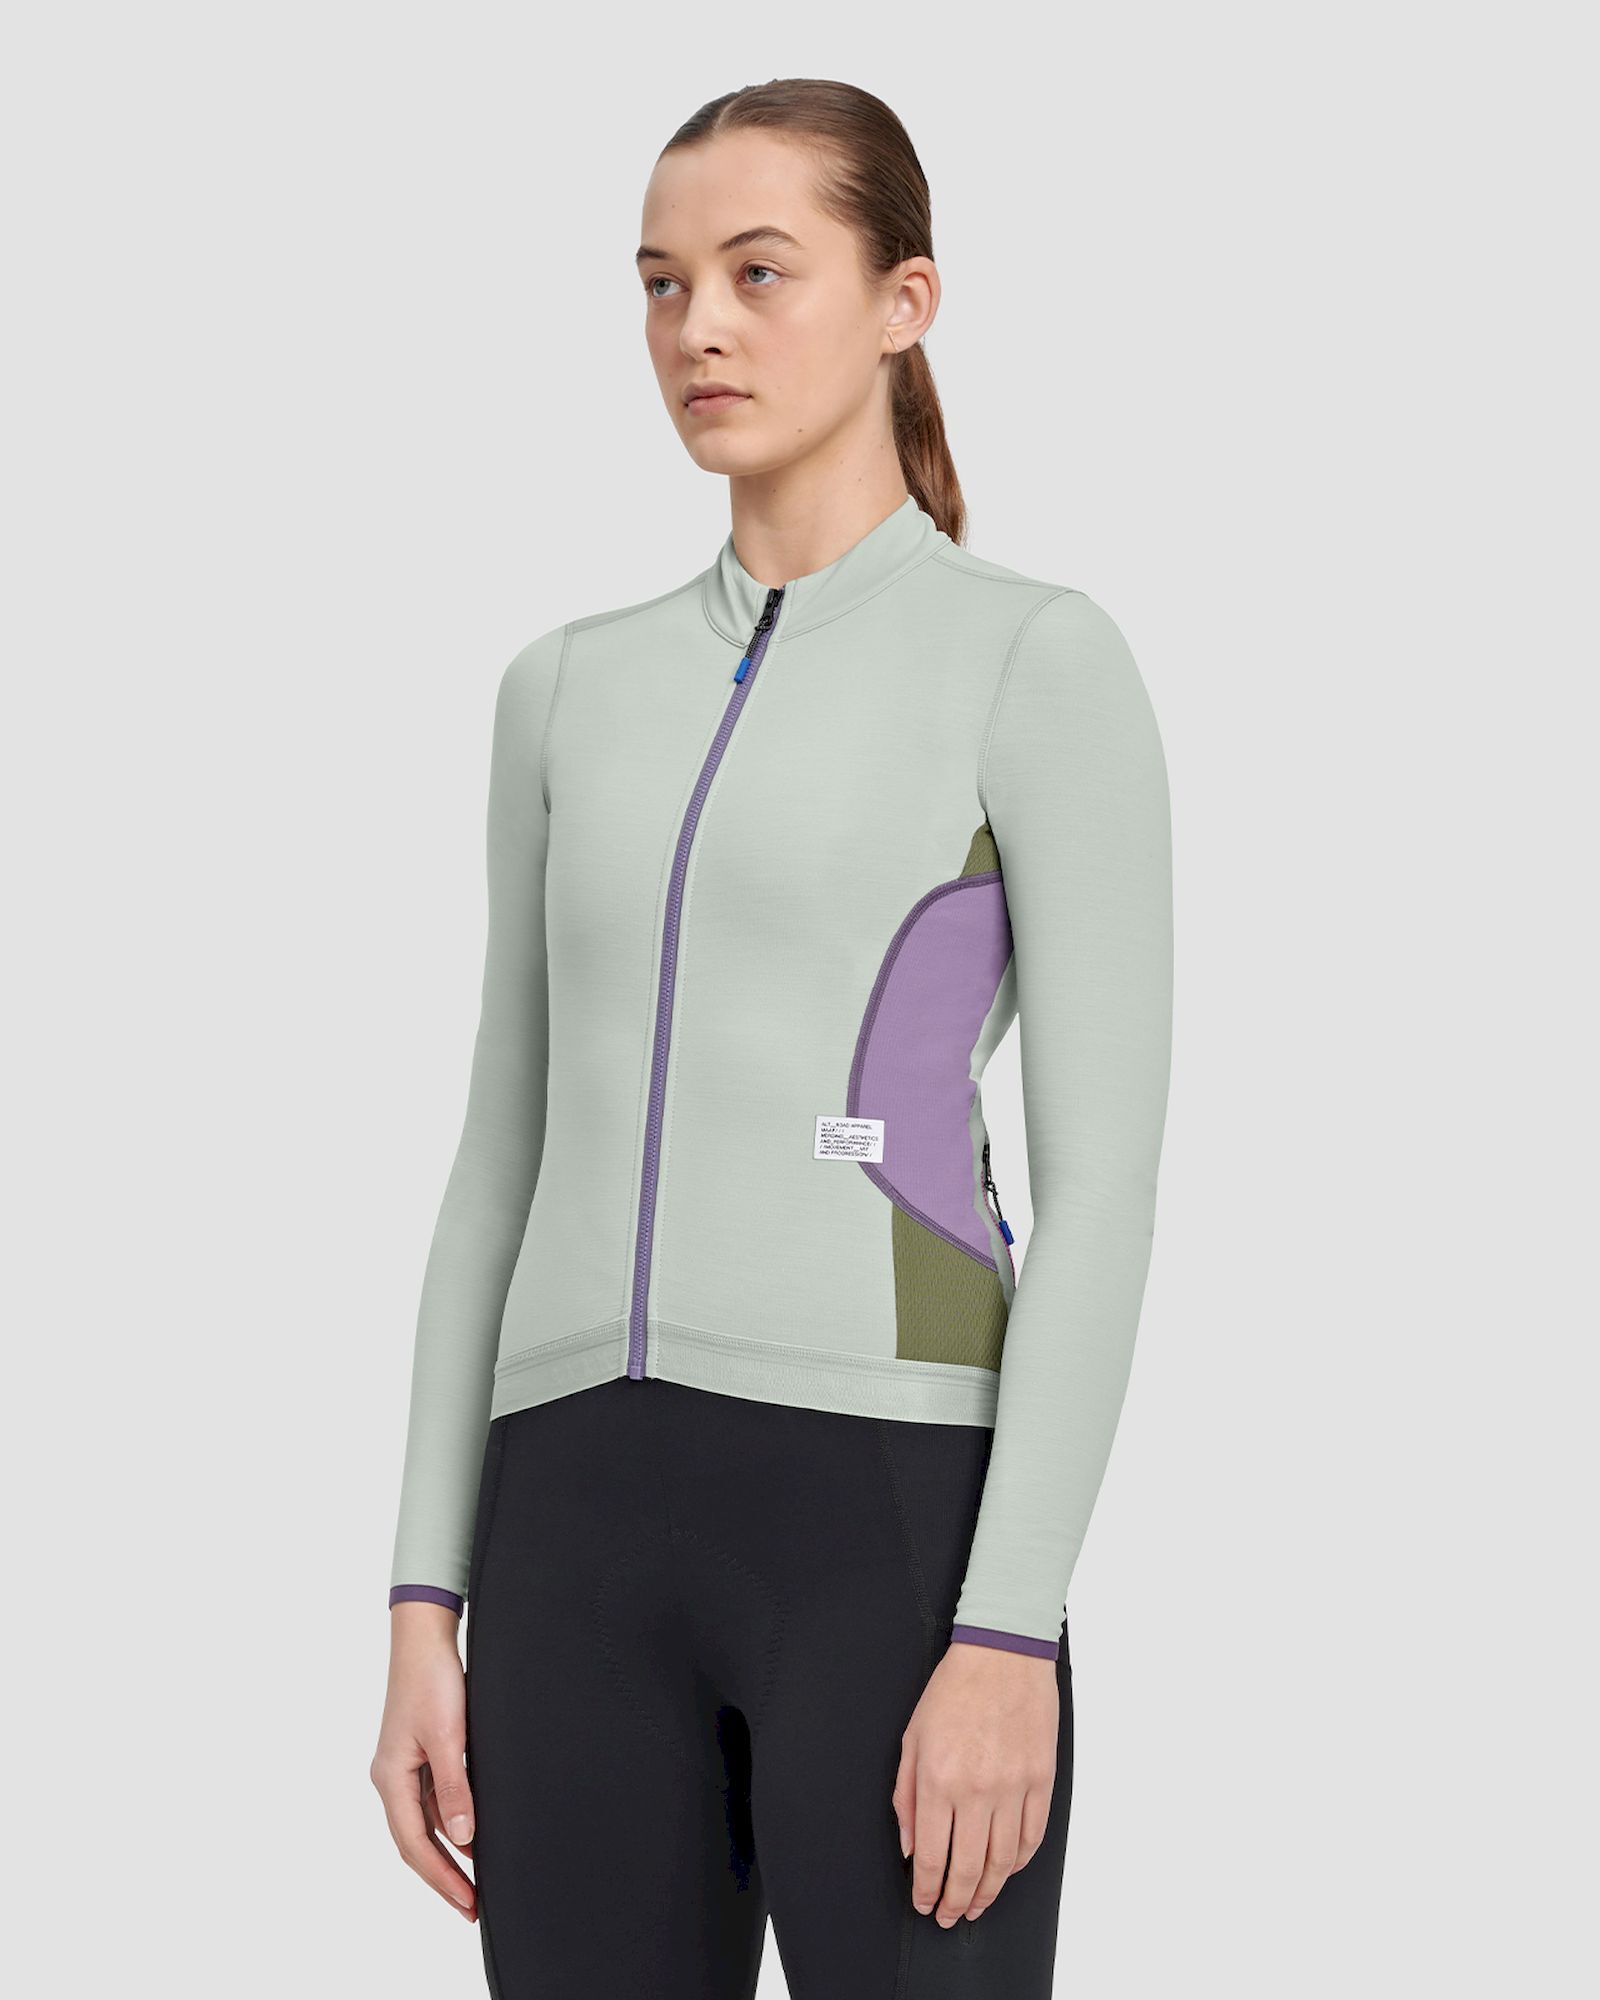 Maap Women's AltRoad LS Jersey - Maillot ciclismo - Mujer | Hardloop